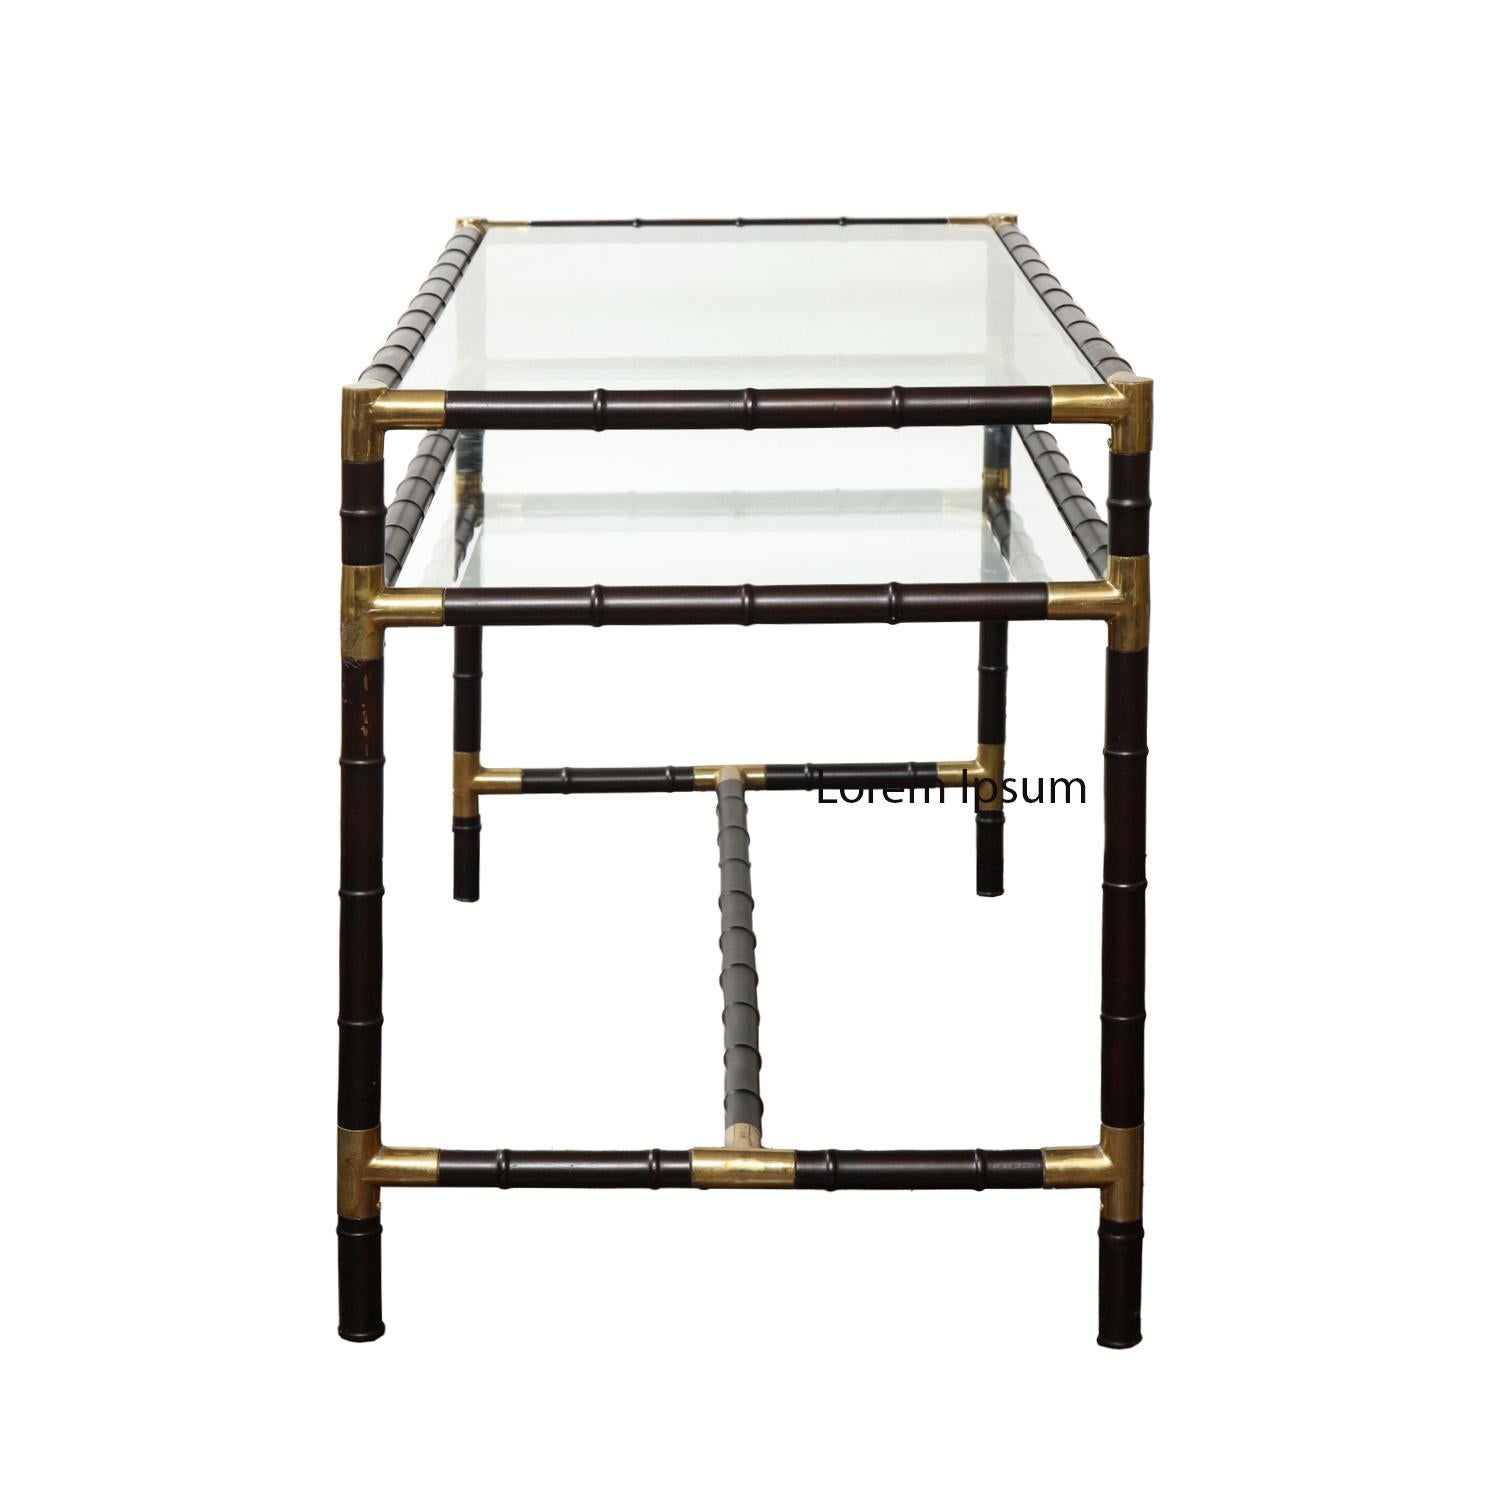 Mid-Century Modern Billy Haines Iconic Faux Bamboo and Glass Table 1970